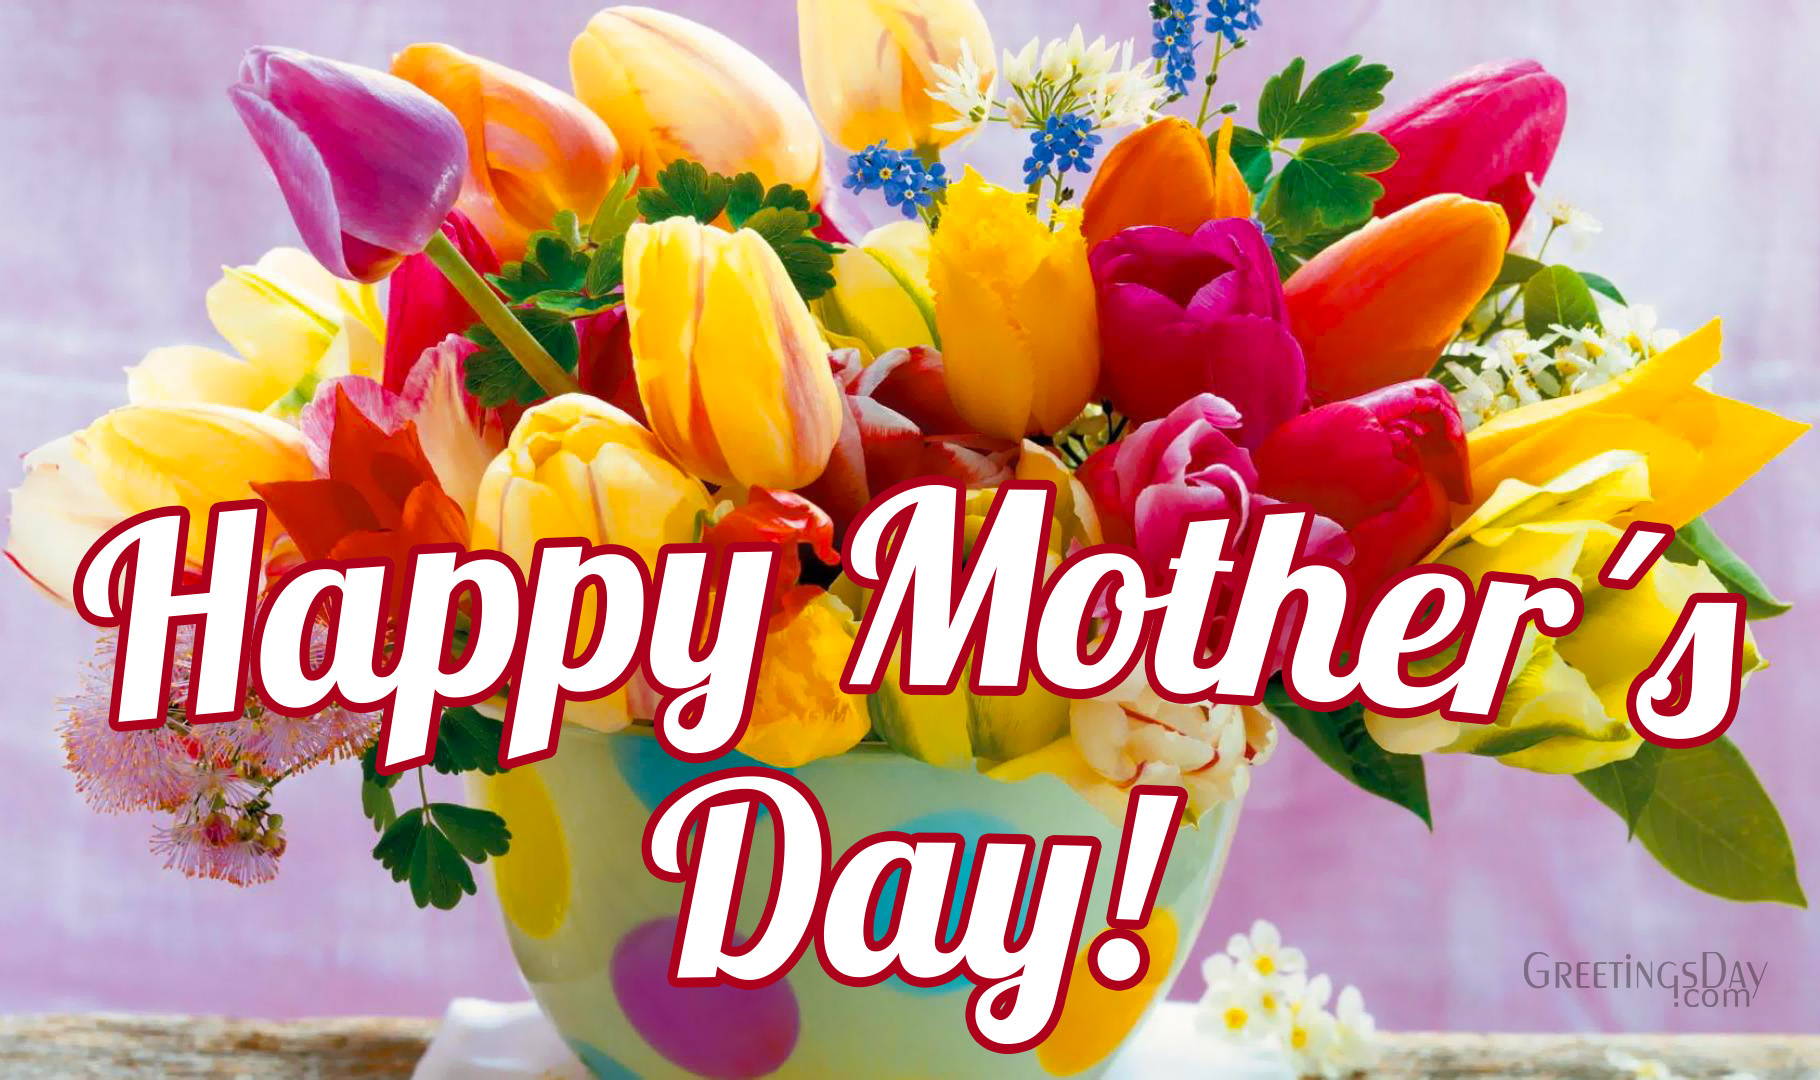 Happy Mother's Day - Online Cards, Photos and Wishes. ⋆ Mother's ...